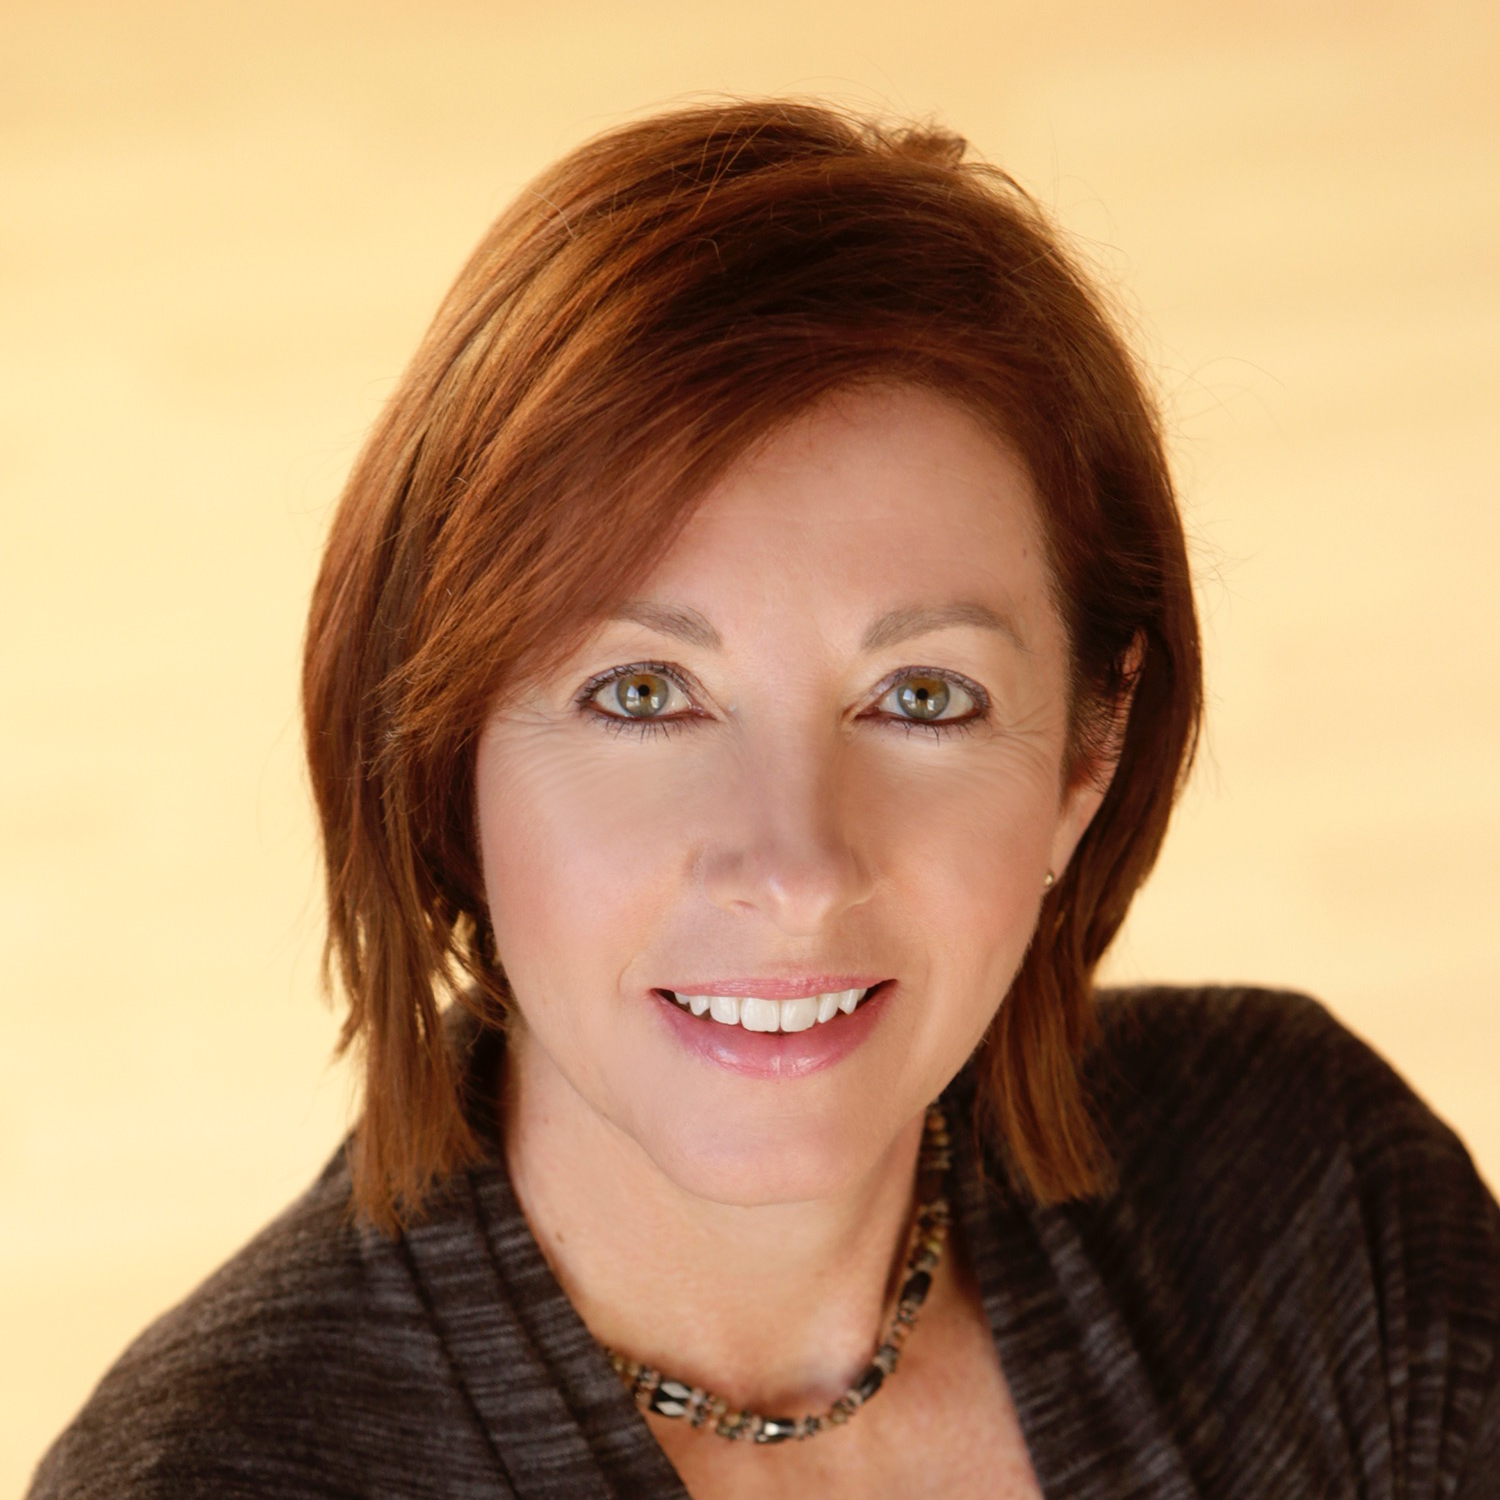 822, 3, 2019-08-26 21:38:46, 2019-08-26 19:38:46, Cathy Biase, Cathy Biase, Cathy Biase, inherit, closed, closed, , 026-cathy-biase-headshot, , , 2019-08-26 21:43:00, 2019-08-26 19:43:00, , 821, https://highwaytohealth.show/wp-content/uploads/2019/08/026-Cathy-Biase-headshot.png, 0, attachment, image/png, 0, and 822